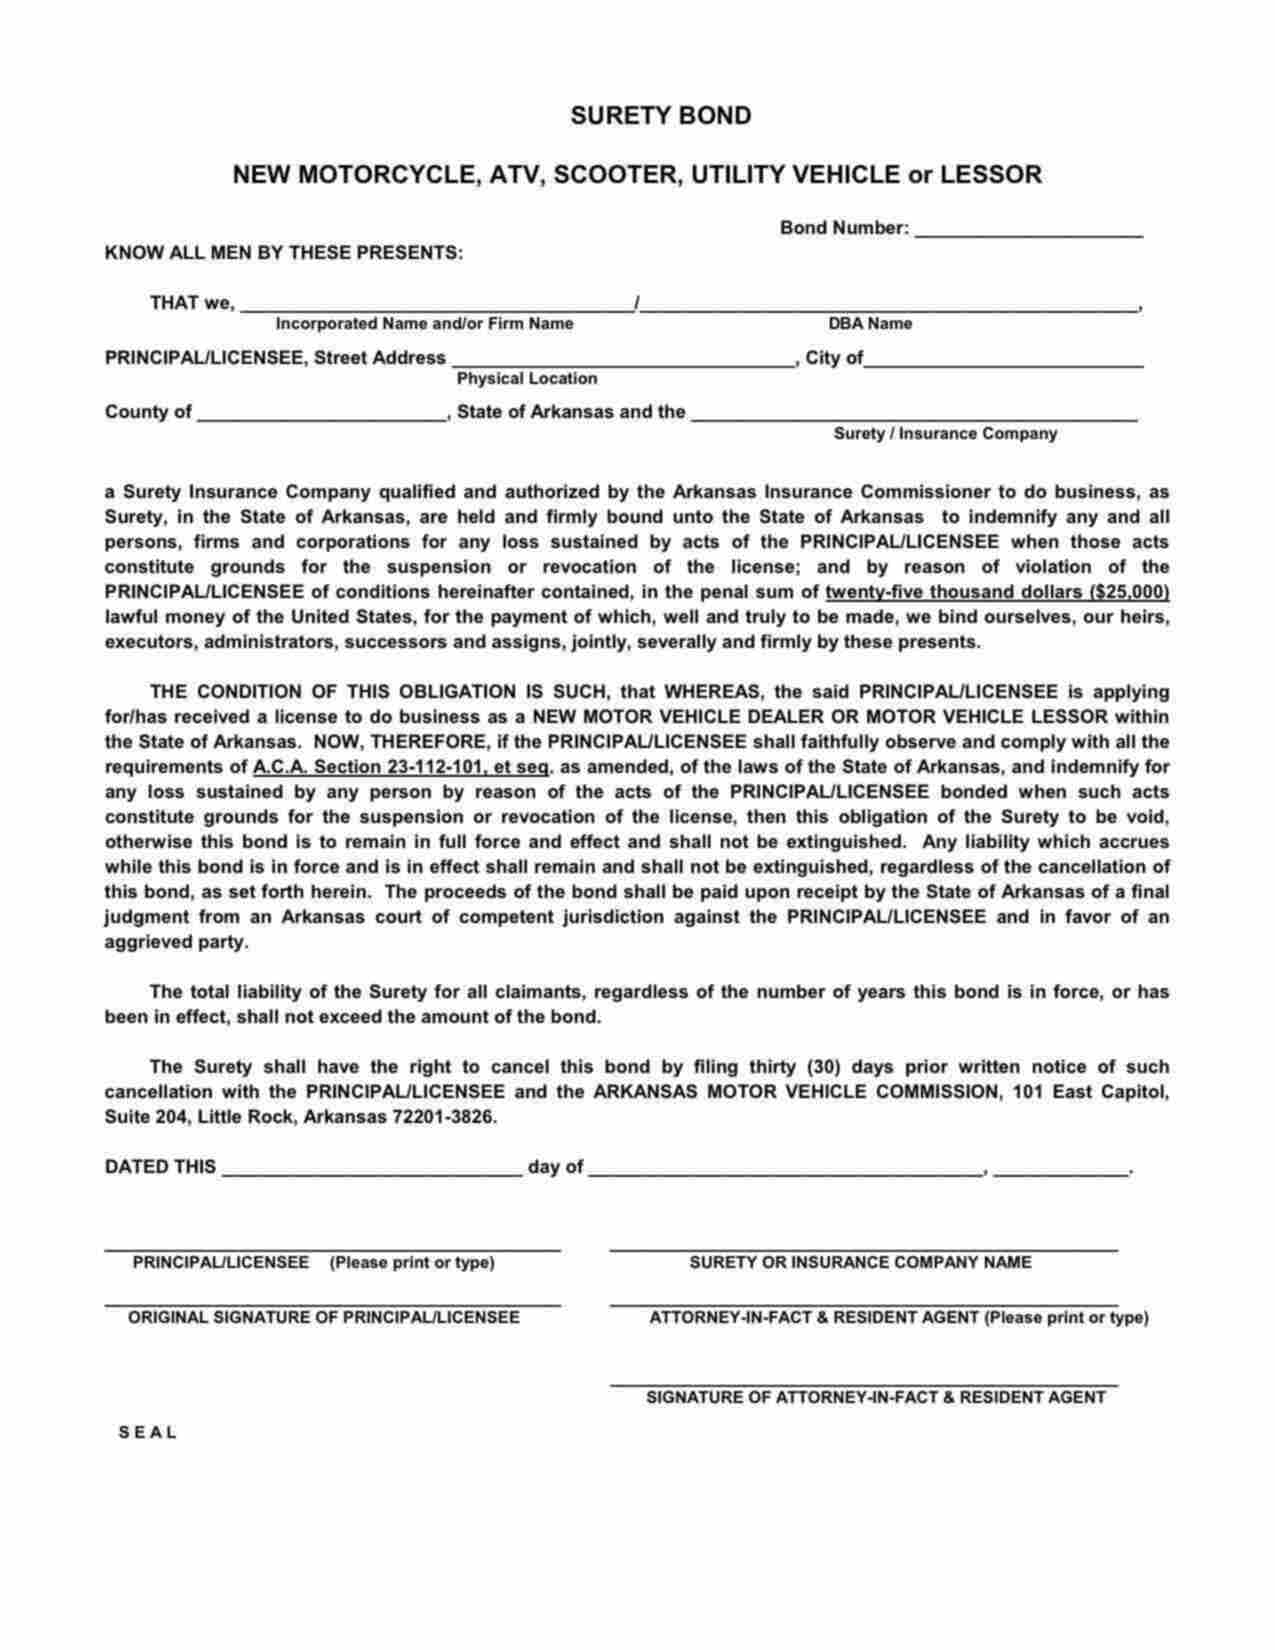 Arkansas New Motorcycle, ATV, Scooter, Utility Vehicle or Lessor Bond Form